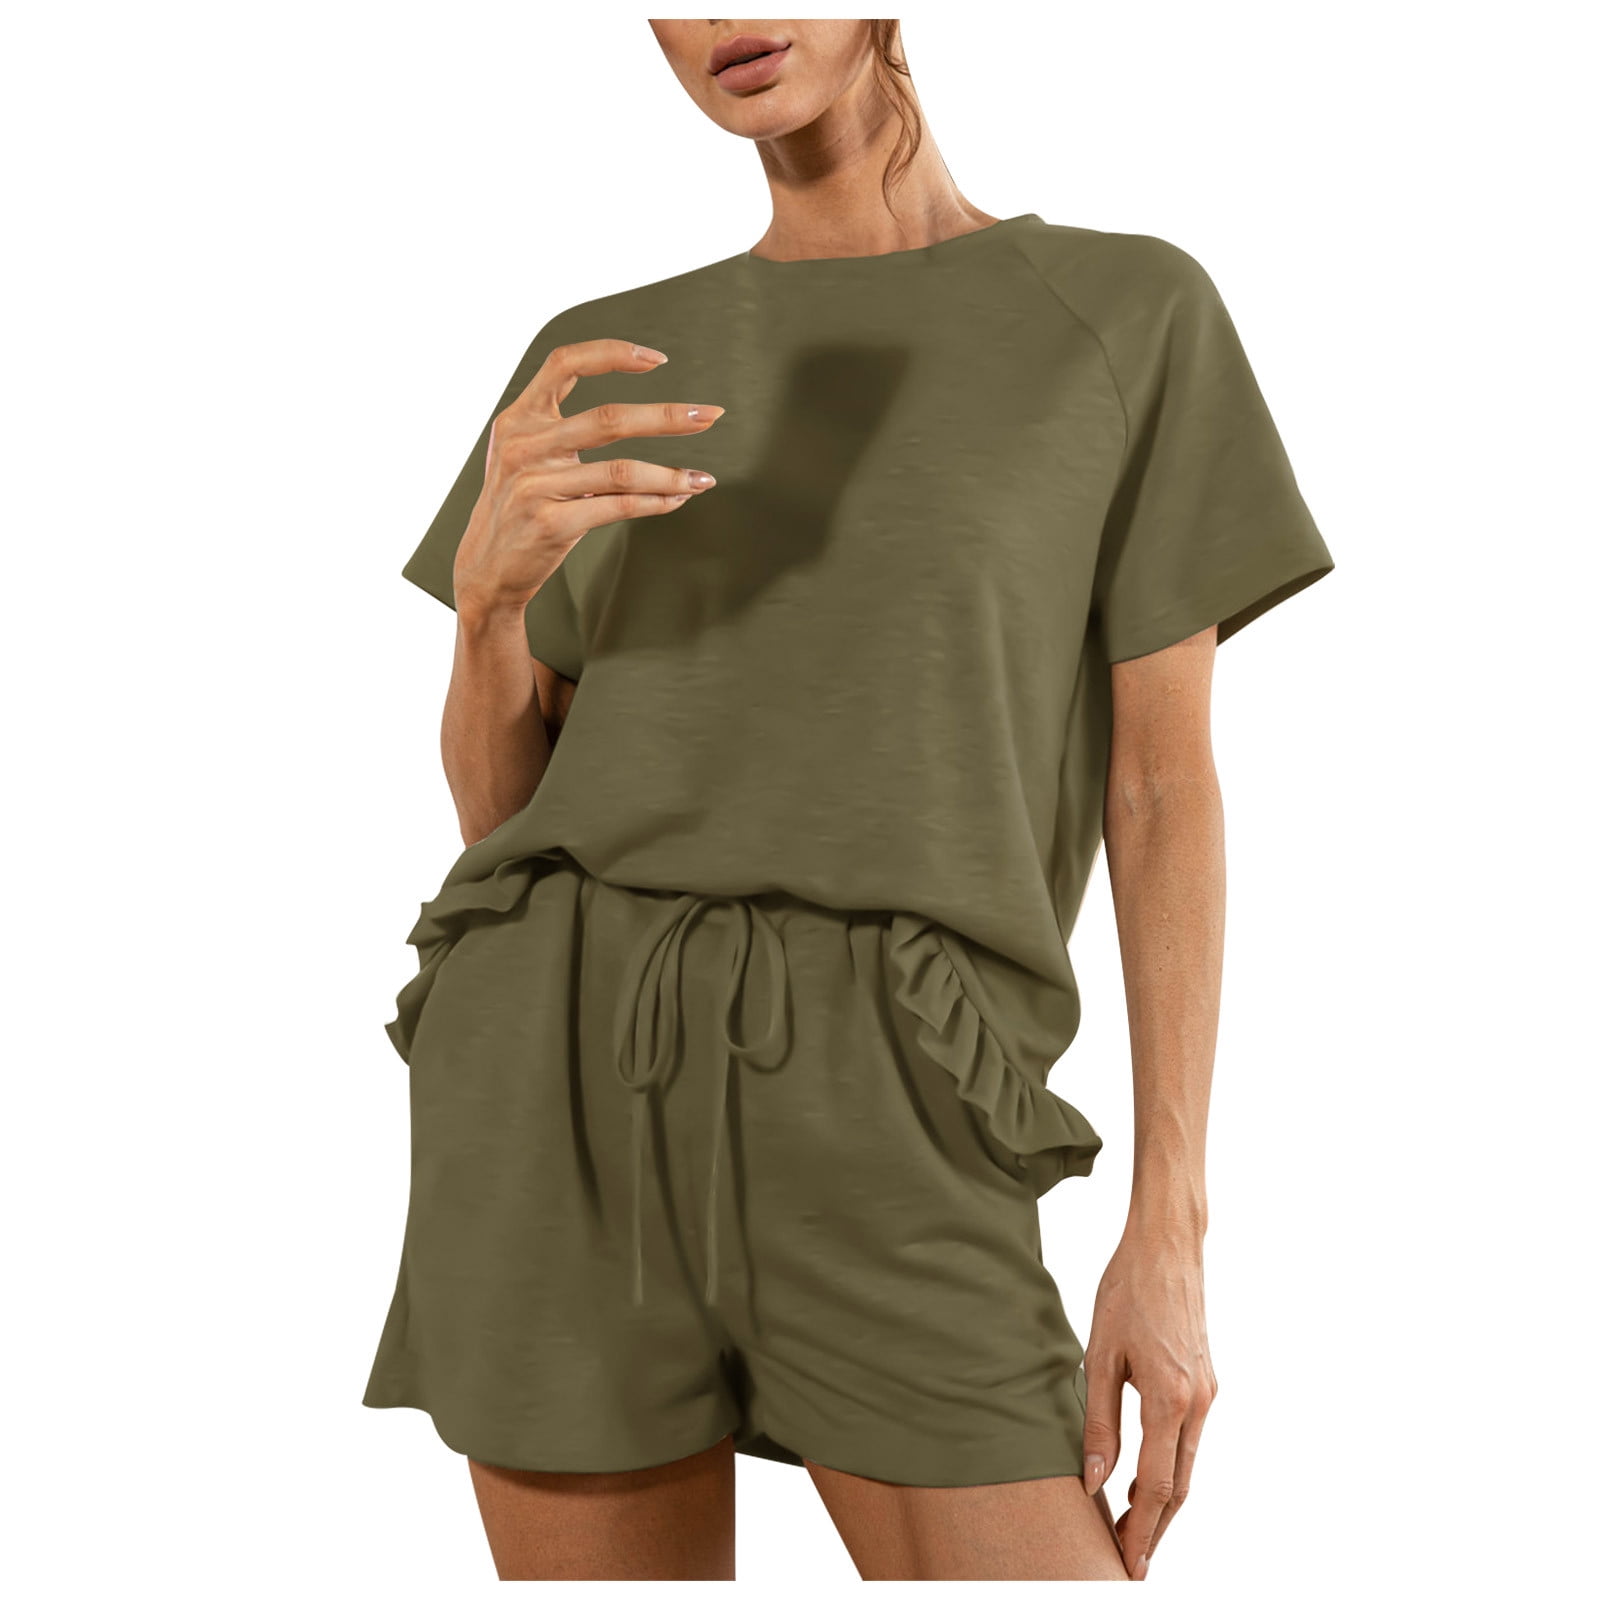 Up to 60% Off! pstuiky Two-Piece Set for Women,Women Short Sleeve